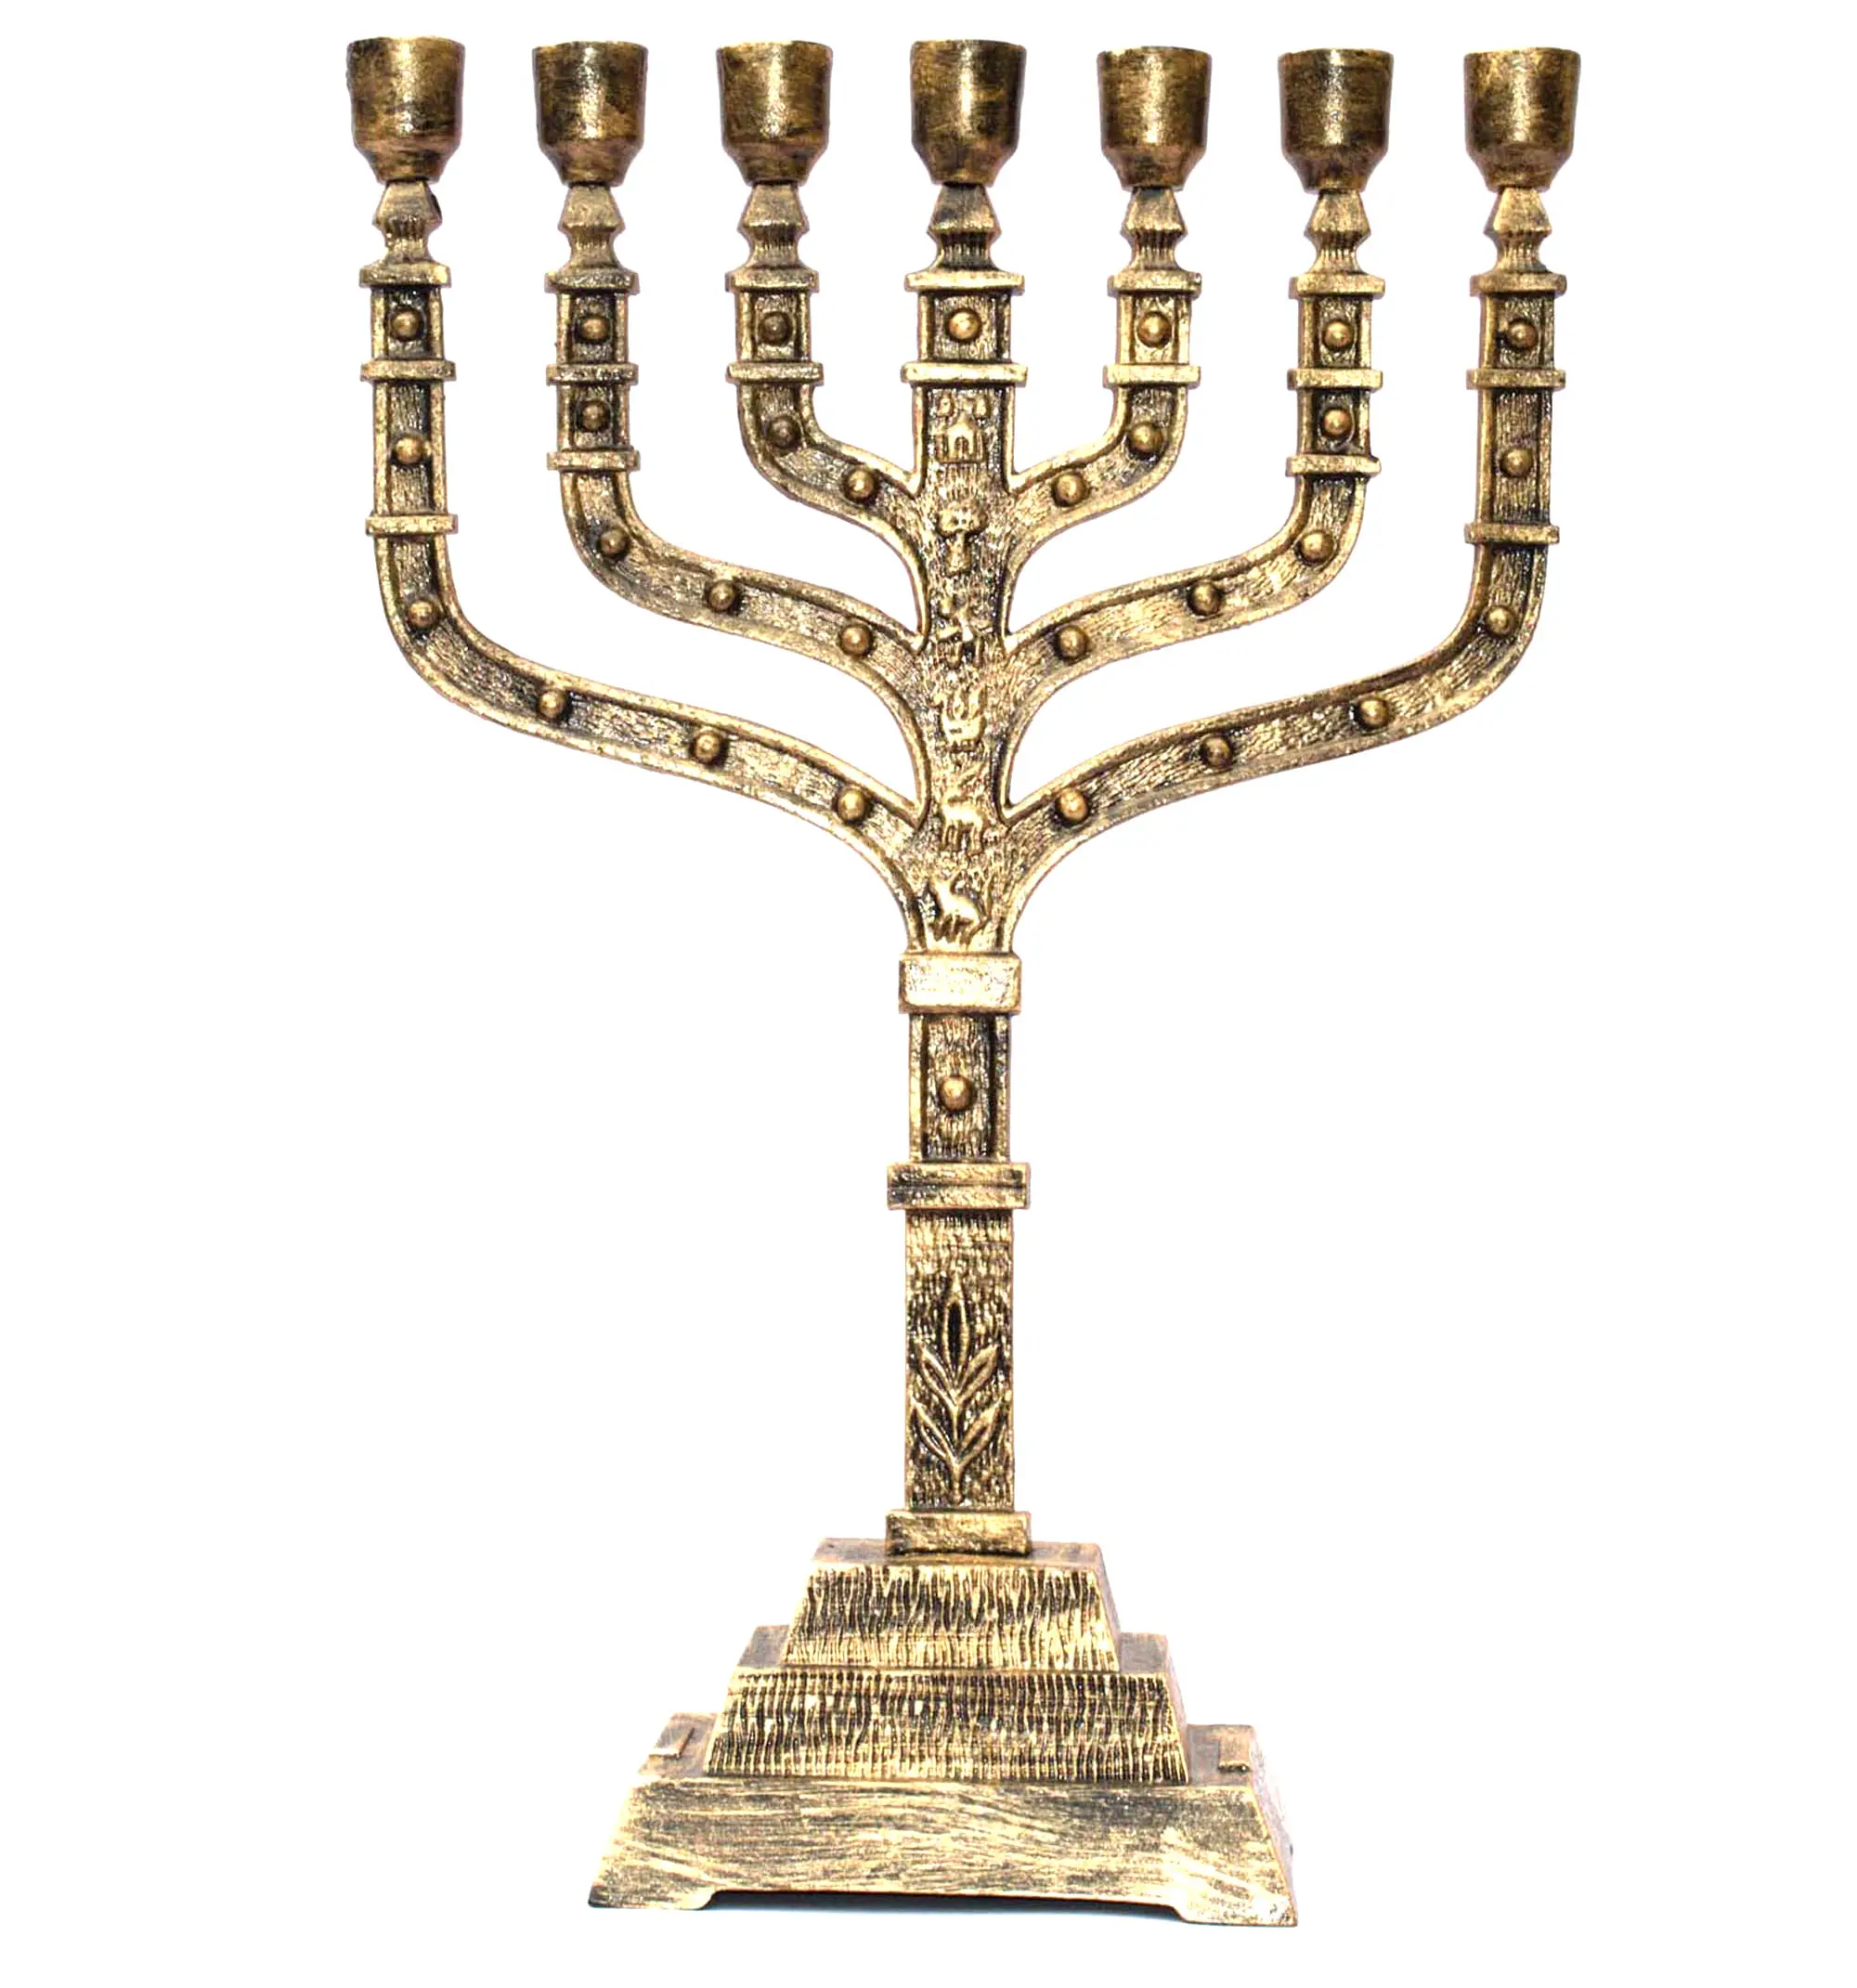 Unique Design Brass Antique 7 Branch Temple MENORAH 12 Tribes Of Israel Candle Stick Holder